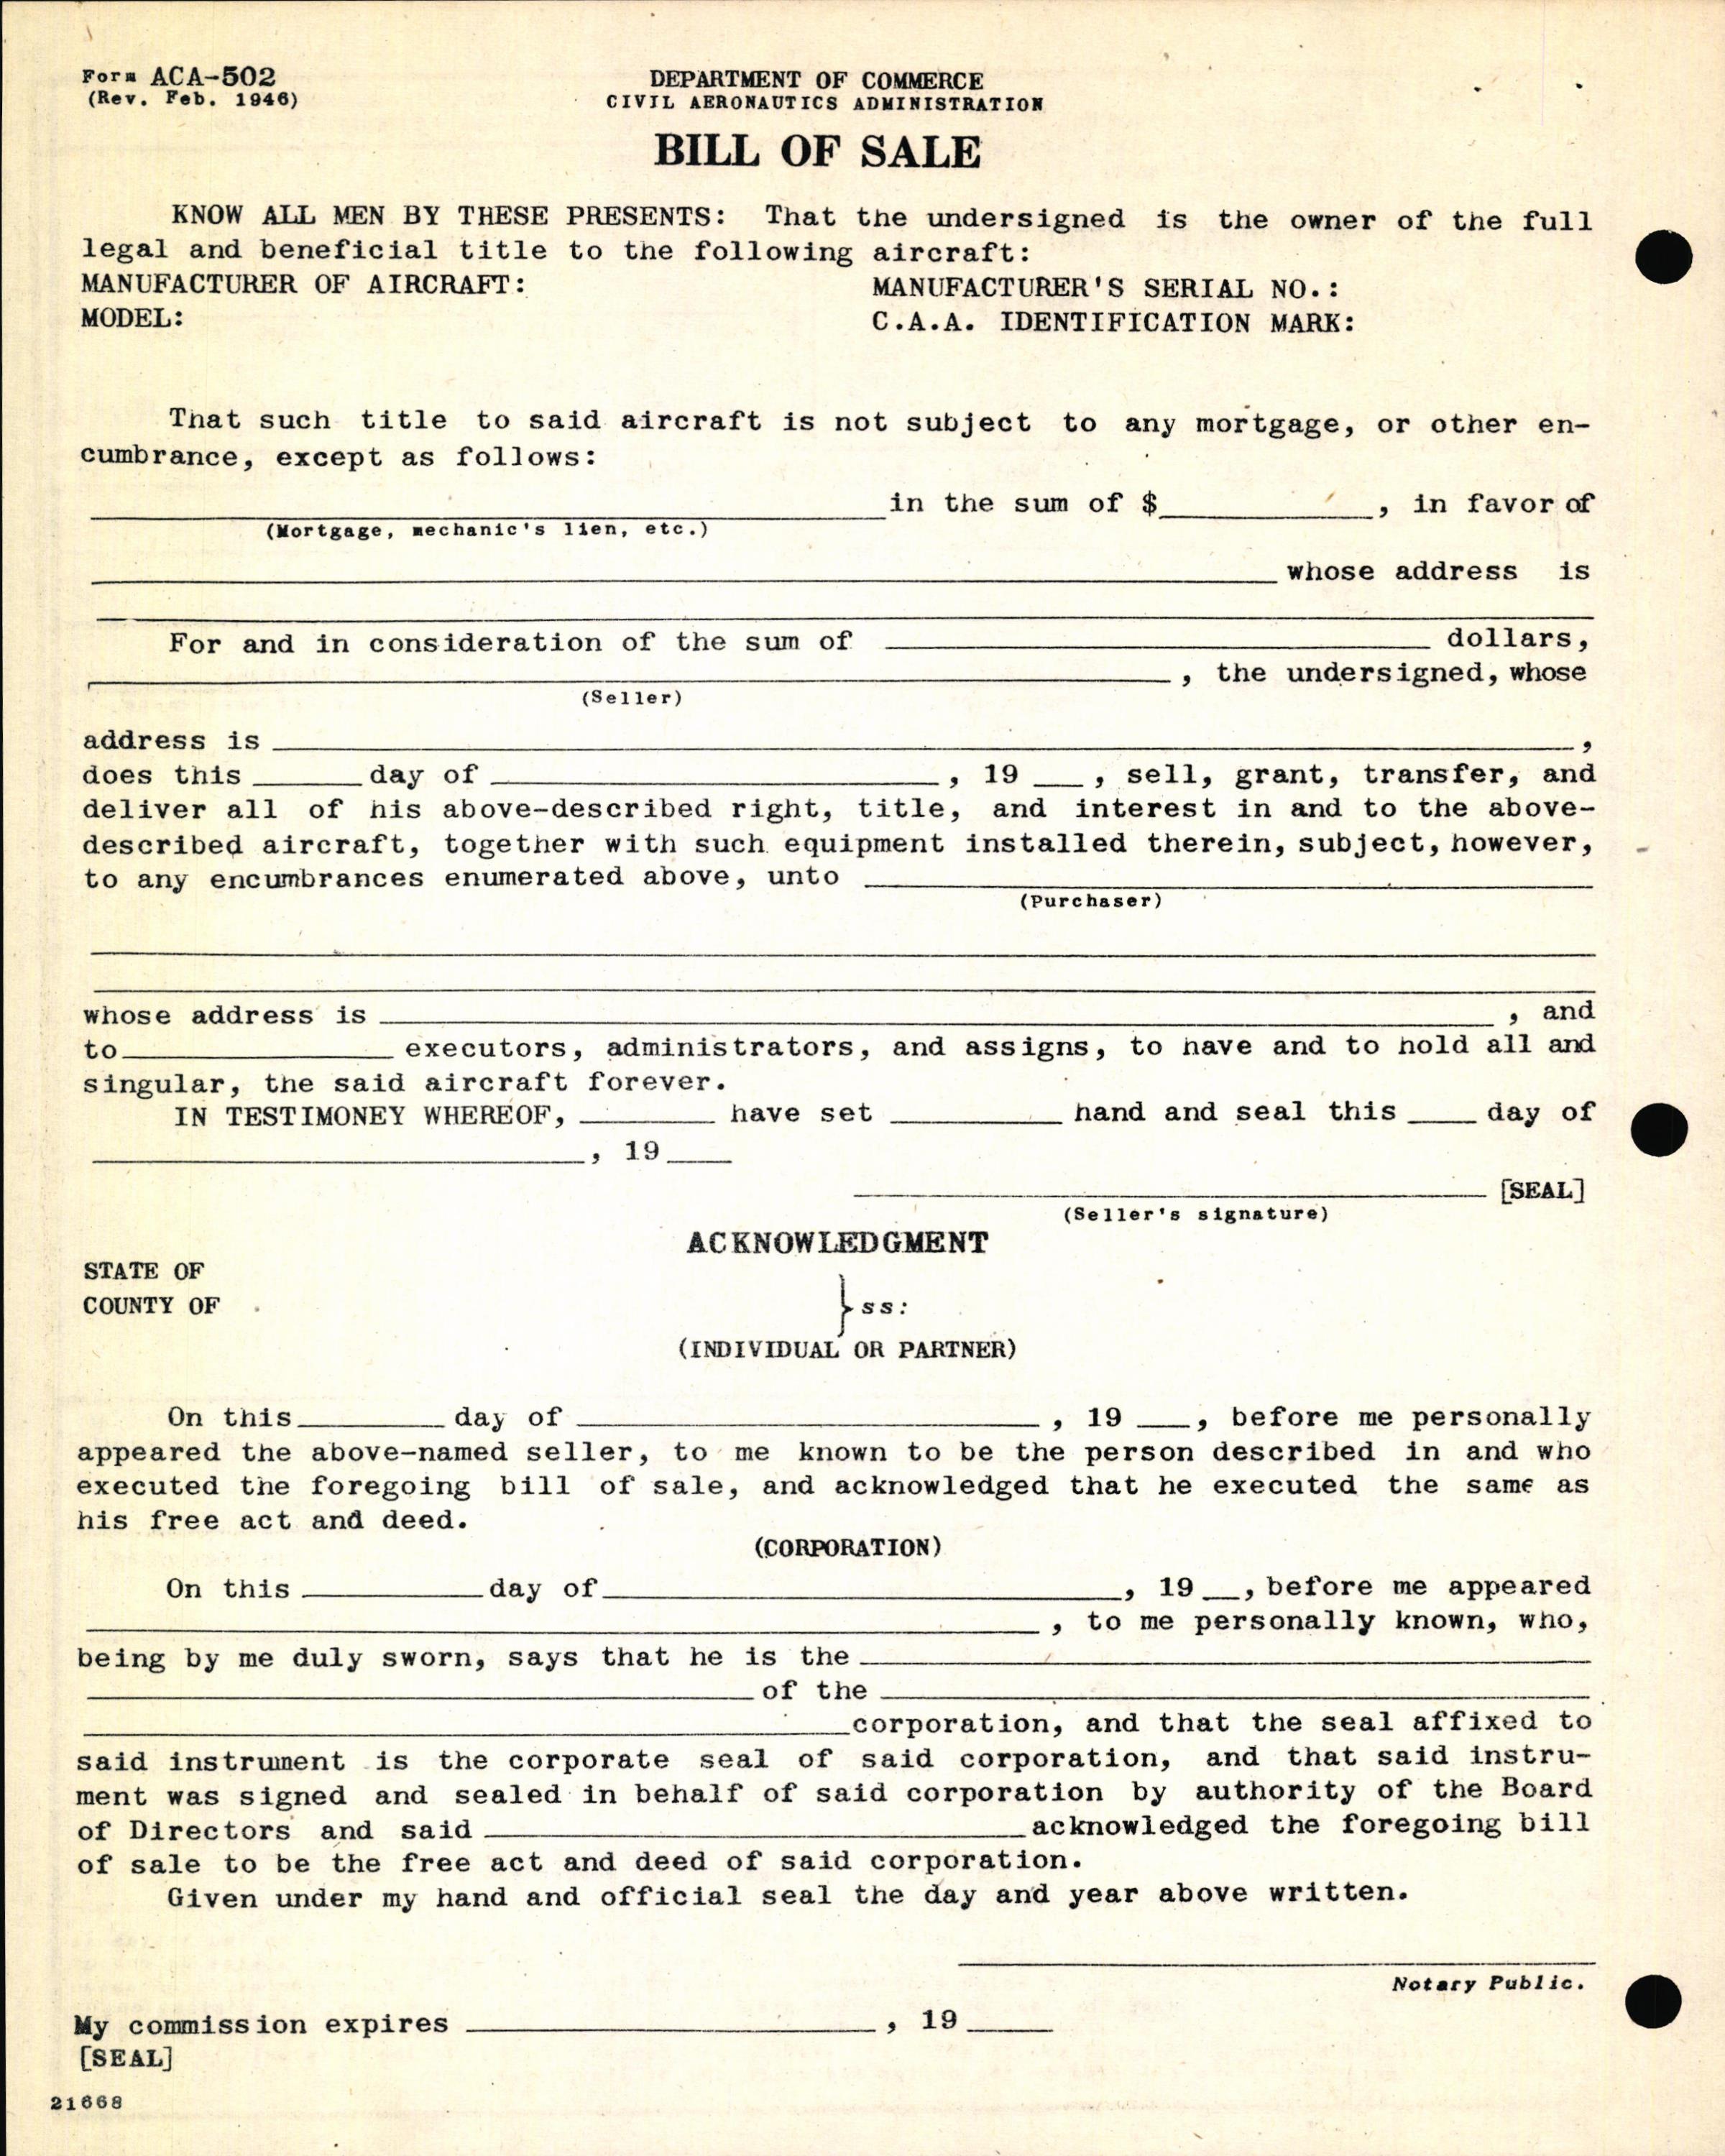 Sample page 6 from AirCorps Library document: Technical Information for Serial Number 1227